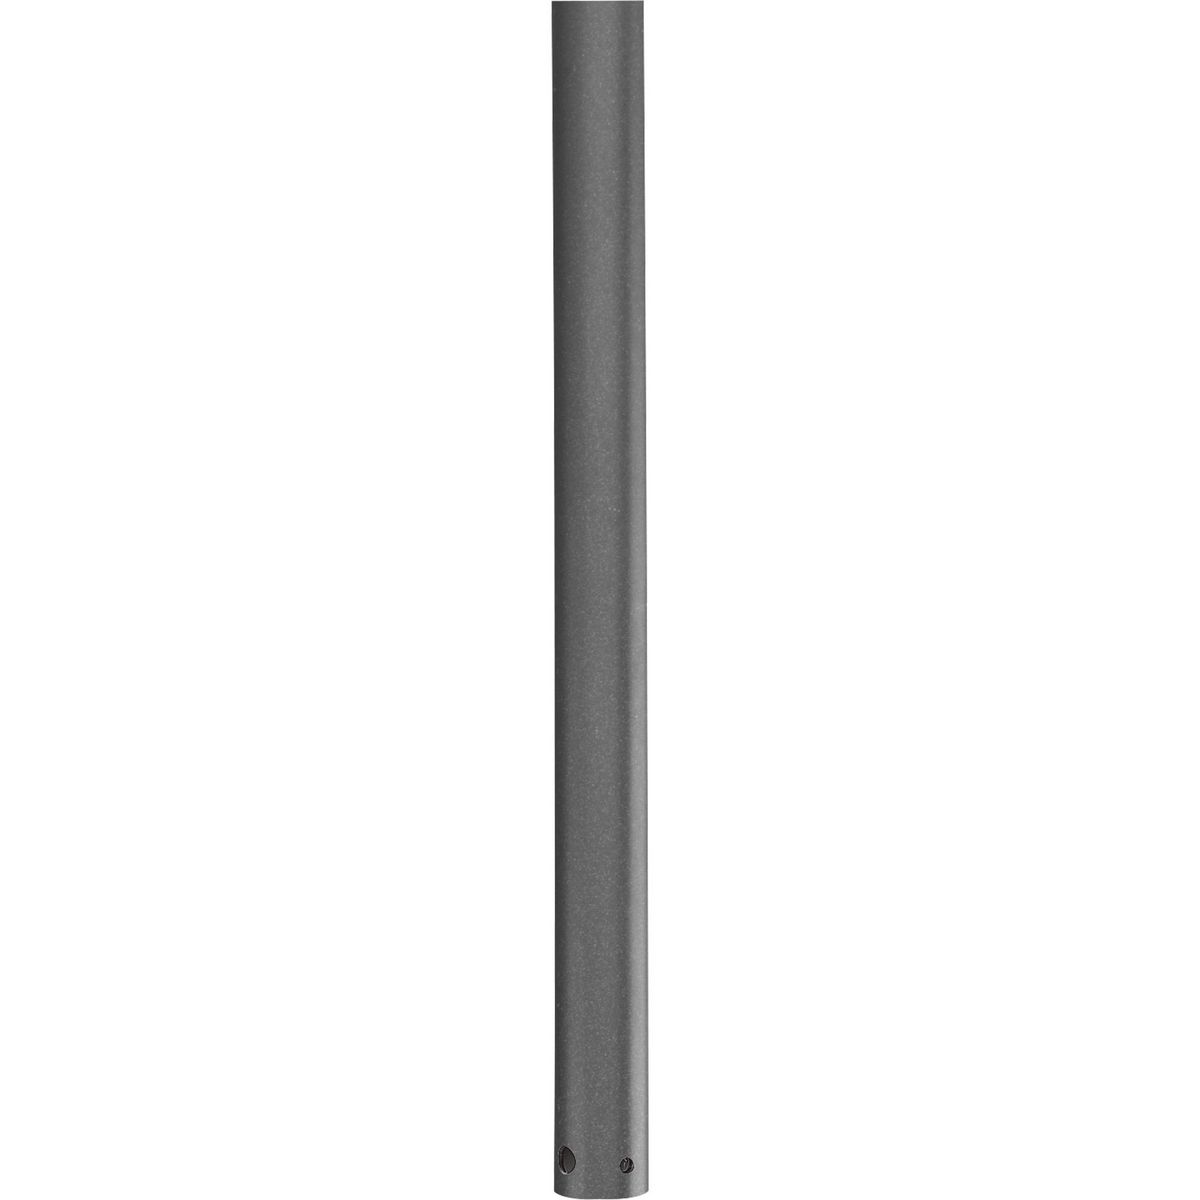 3/4 In. x 12 In. downrod for use with any Progress Lighting ceiling fan. Use of a fan downrod positions your ceiling fan at the optimal height for air circulation and provides the perfect solution for installation on high cathedral ceilings or in great rooms. Refer to the selection guide for recommended downrod lengths based upon your ceiling height. Graphite finish.